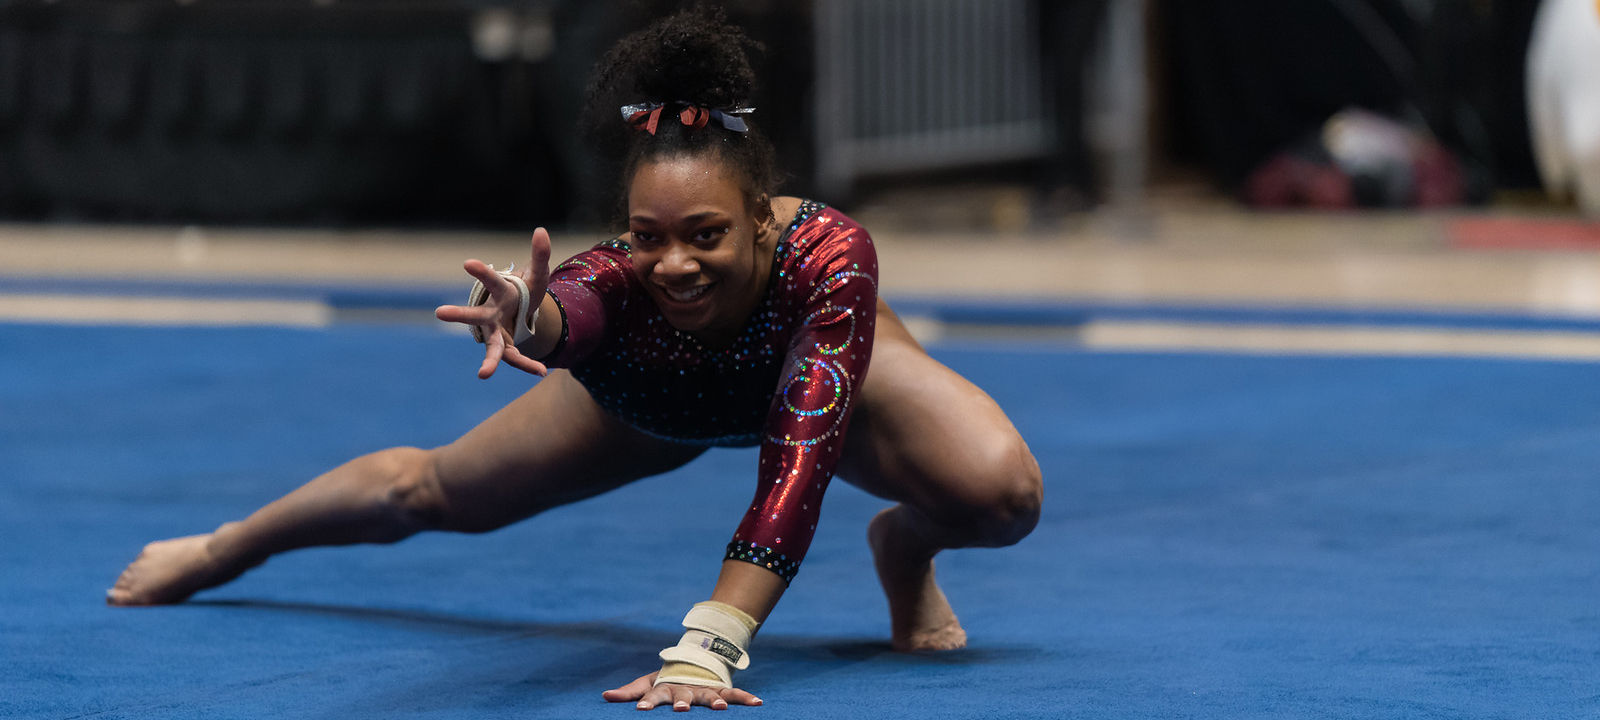 Gymnastics To Face TWU At Home On Friday